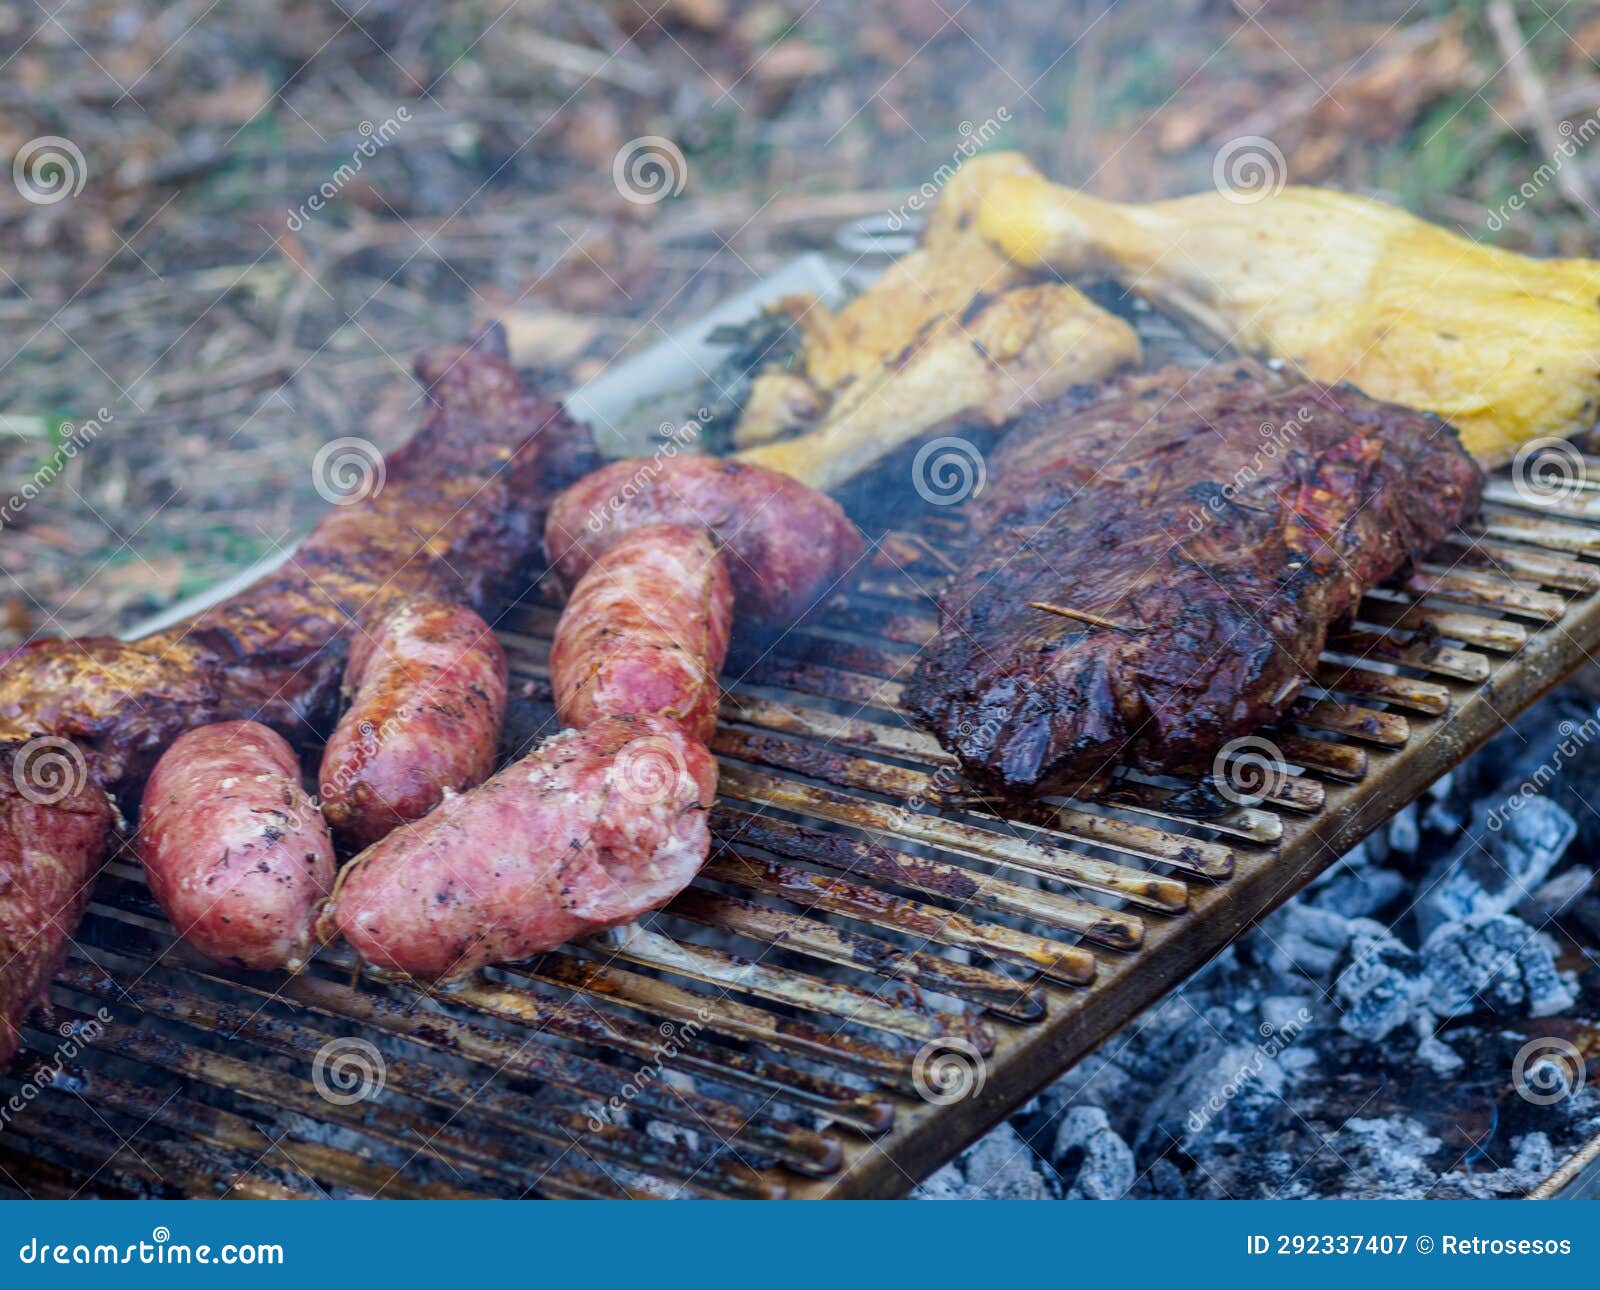 slow grilling chorizo sausages , chicken quarters, skirt and flank muscle steaks argentinian cuts